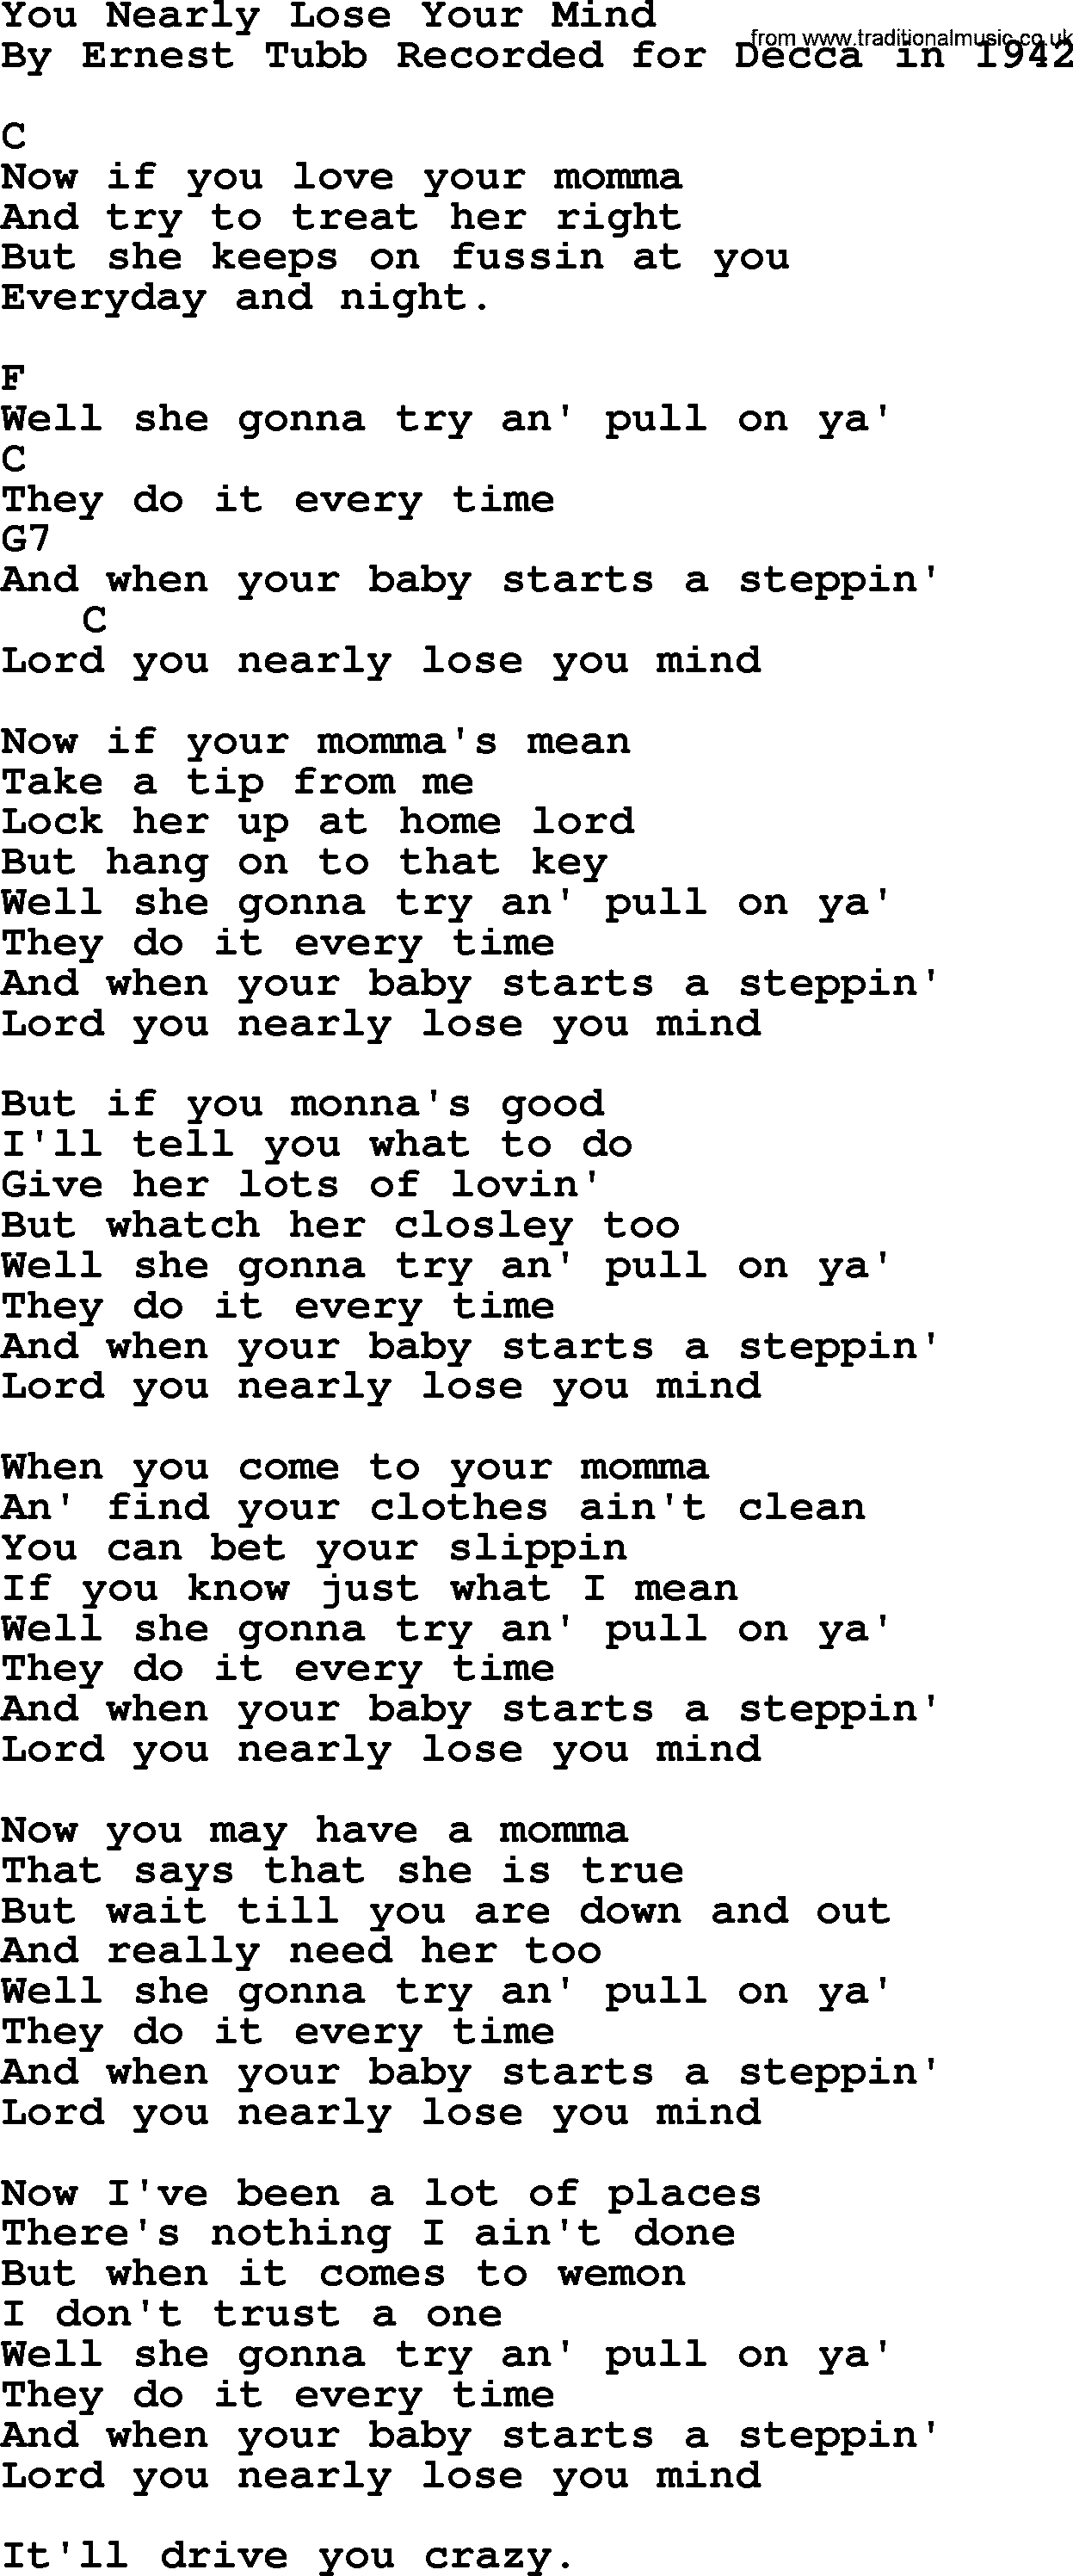 Bluegrass song: You Nearly Lose Your Mind, lyrics and chords